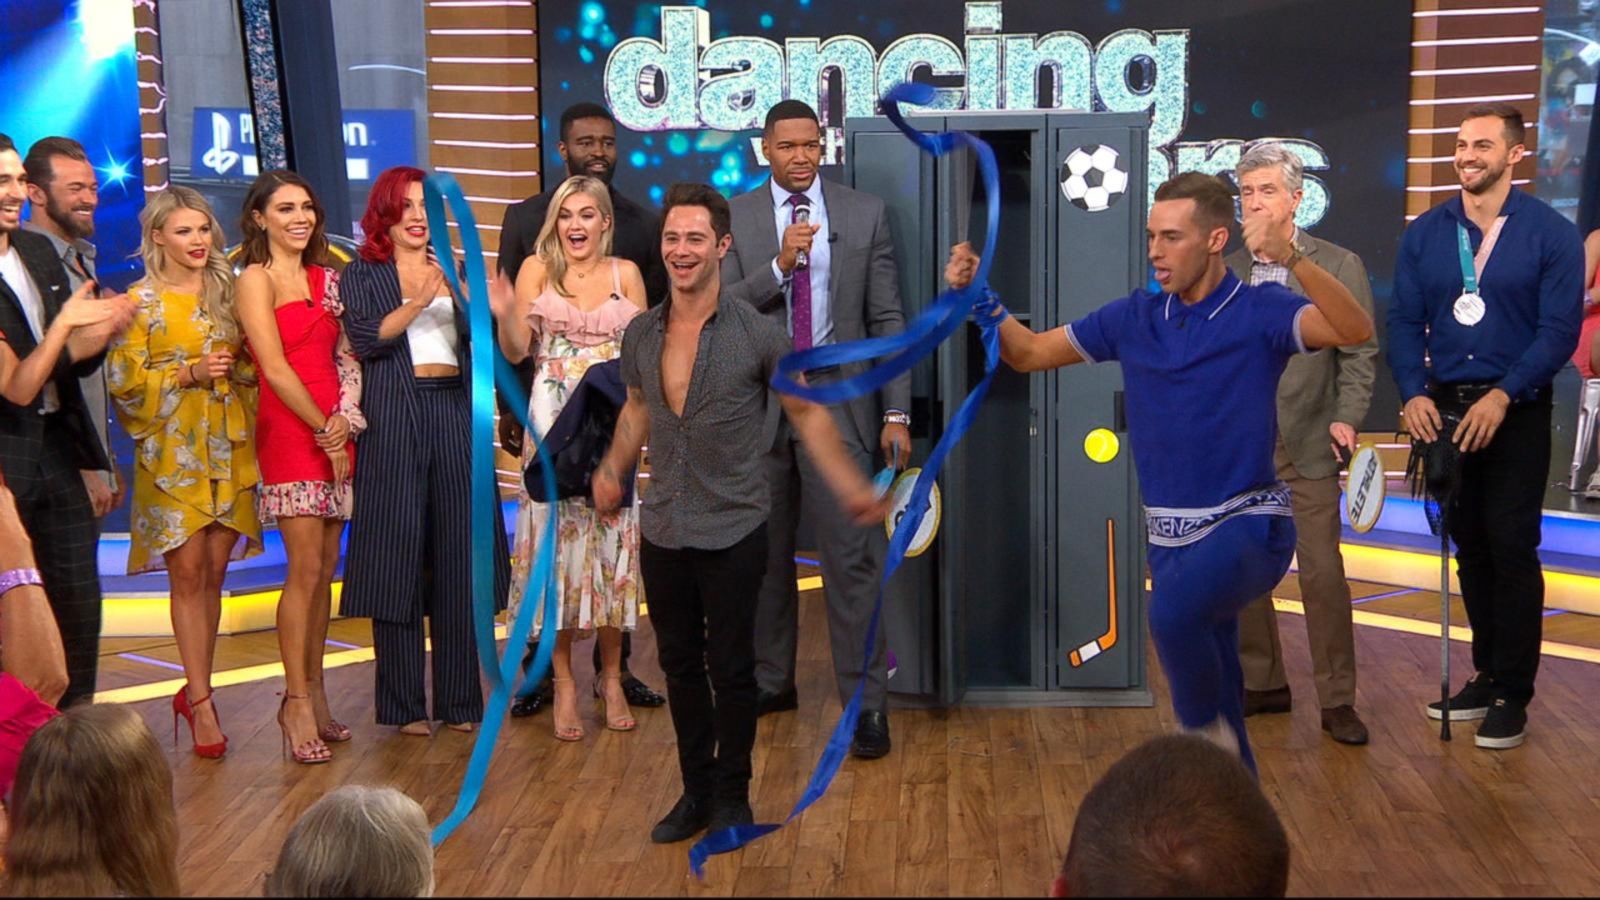 VIDEO: 'Dancing With the Stars' season 26 cast practice their moves on 'GMA'